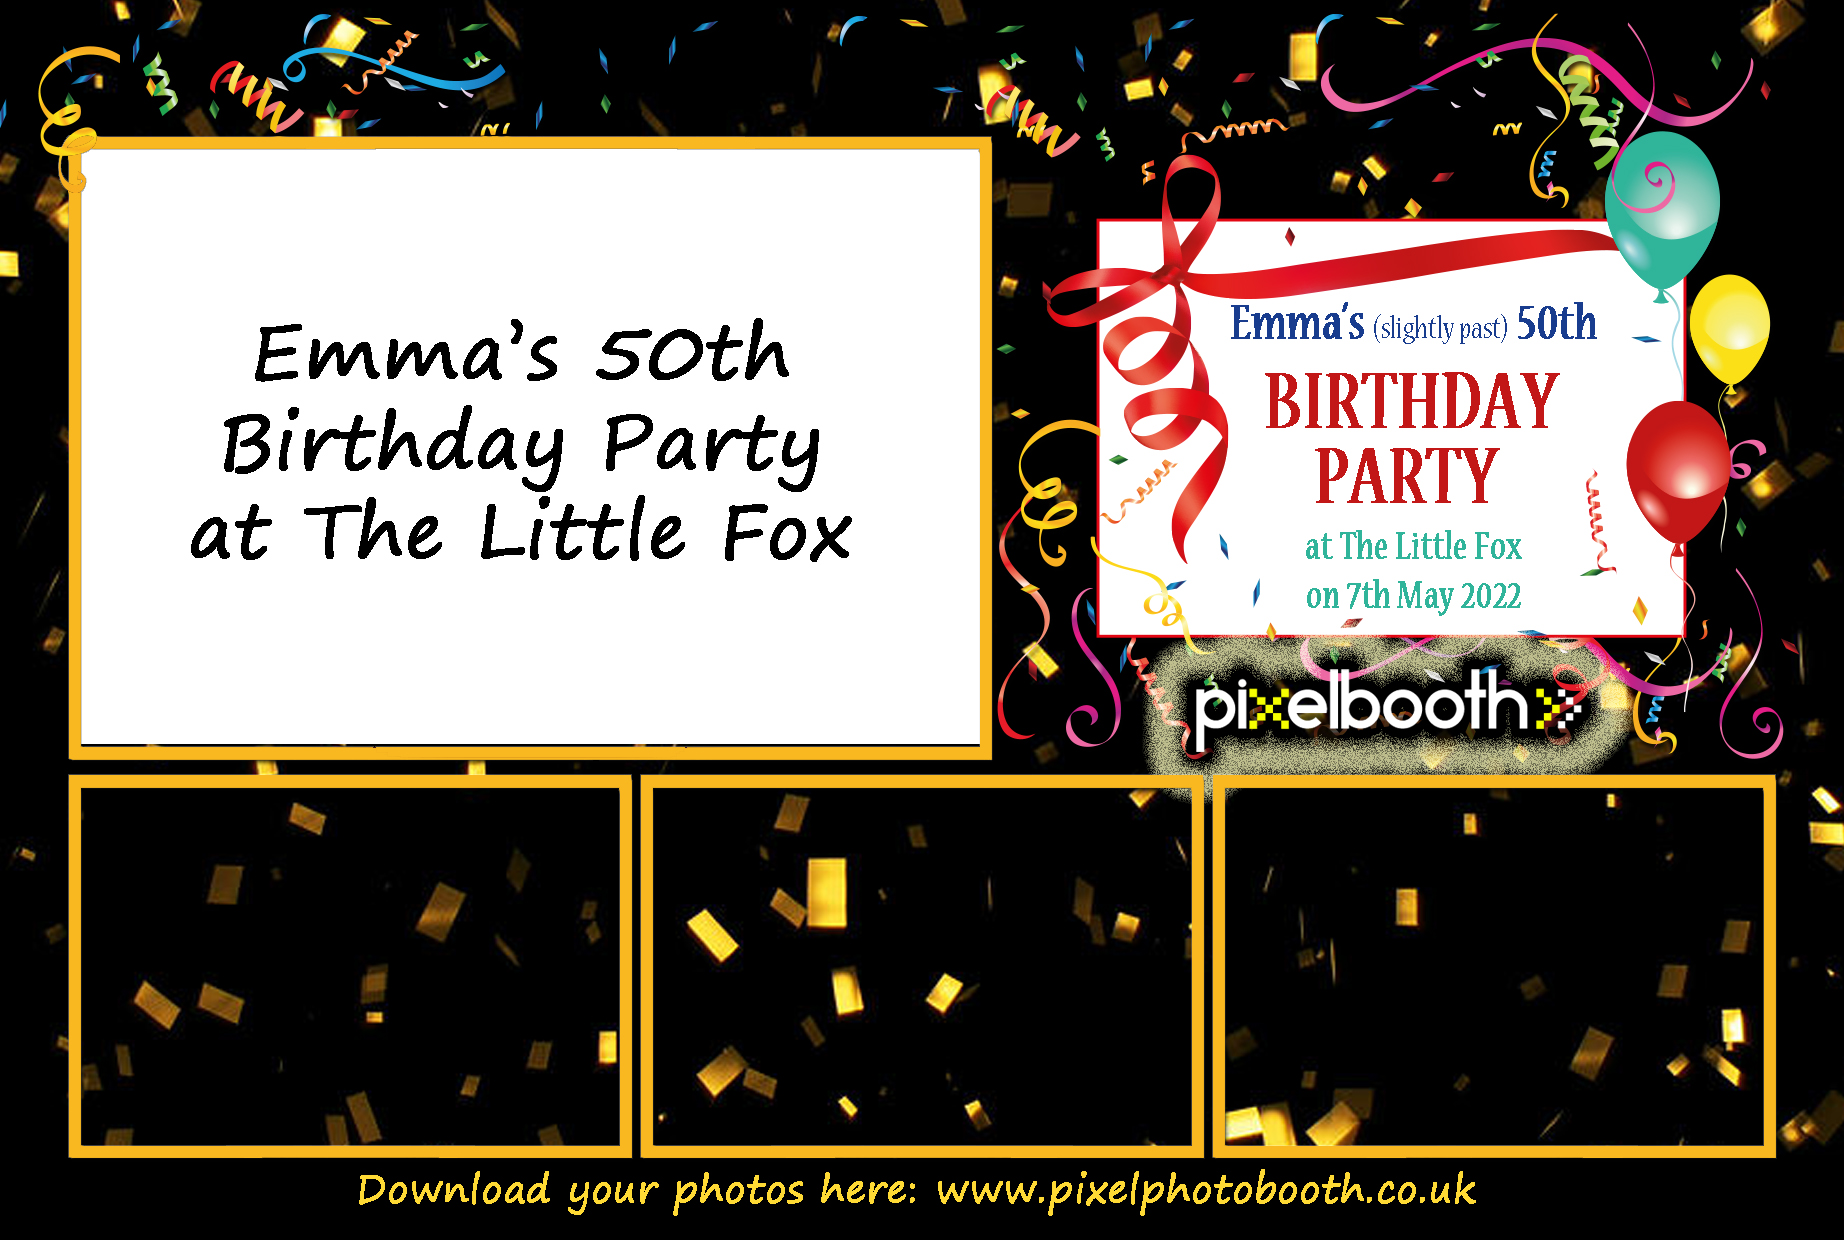 7th May 2022: Emma's 50th Birthday Party at The Little Fox